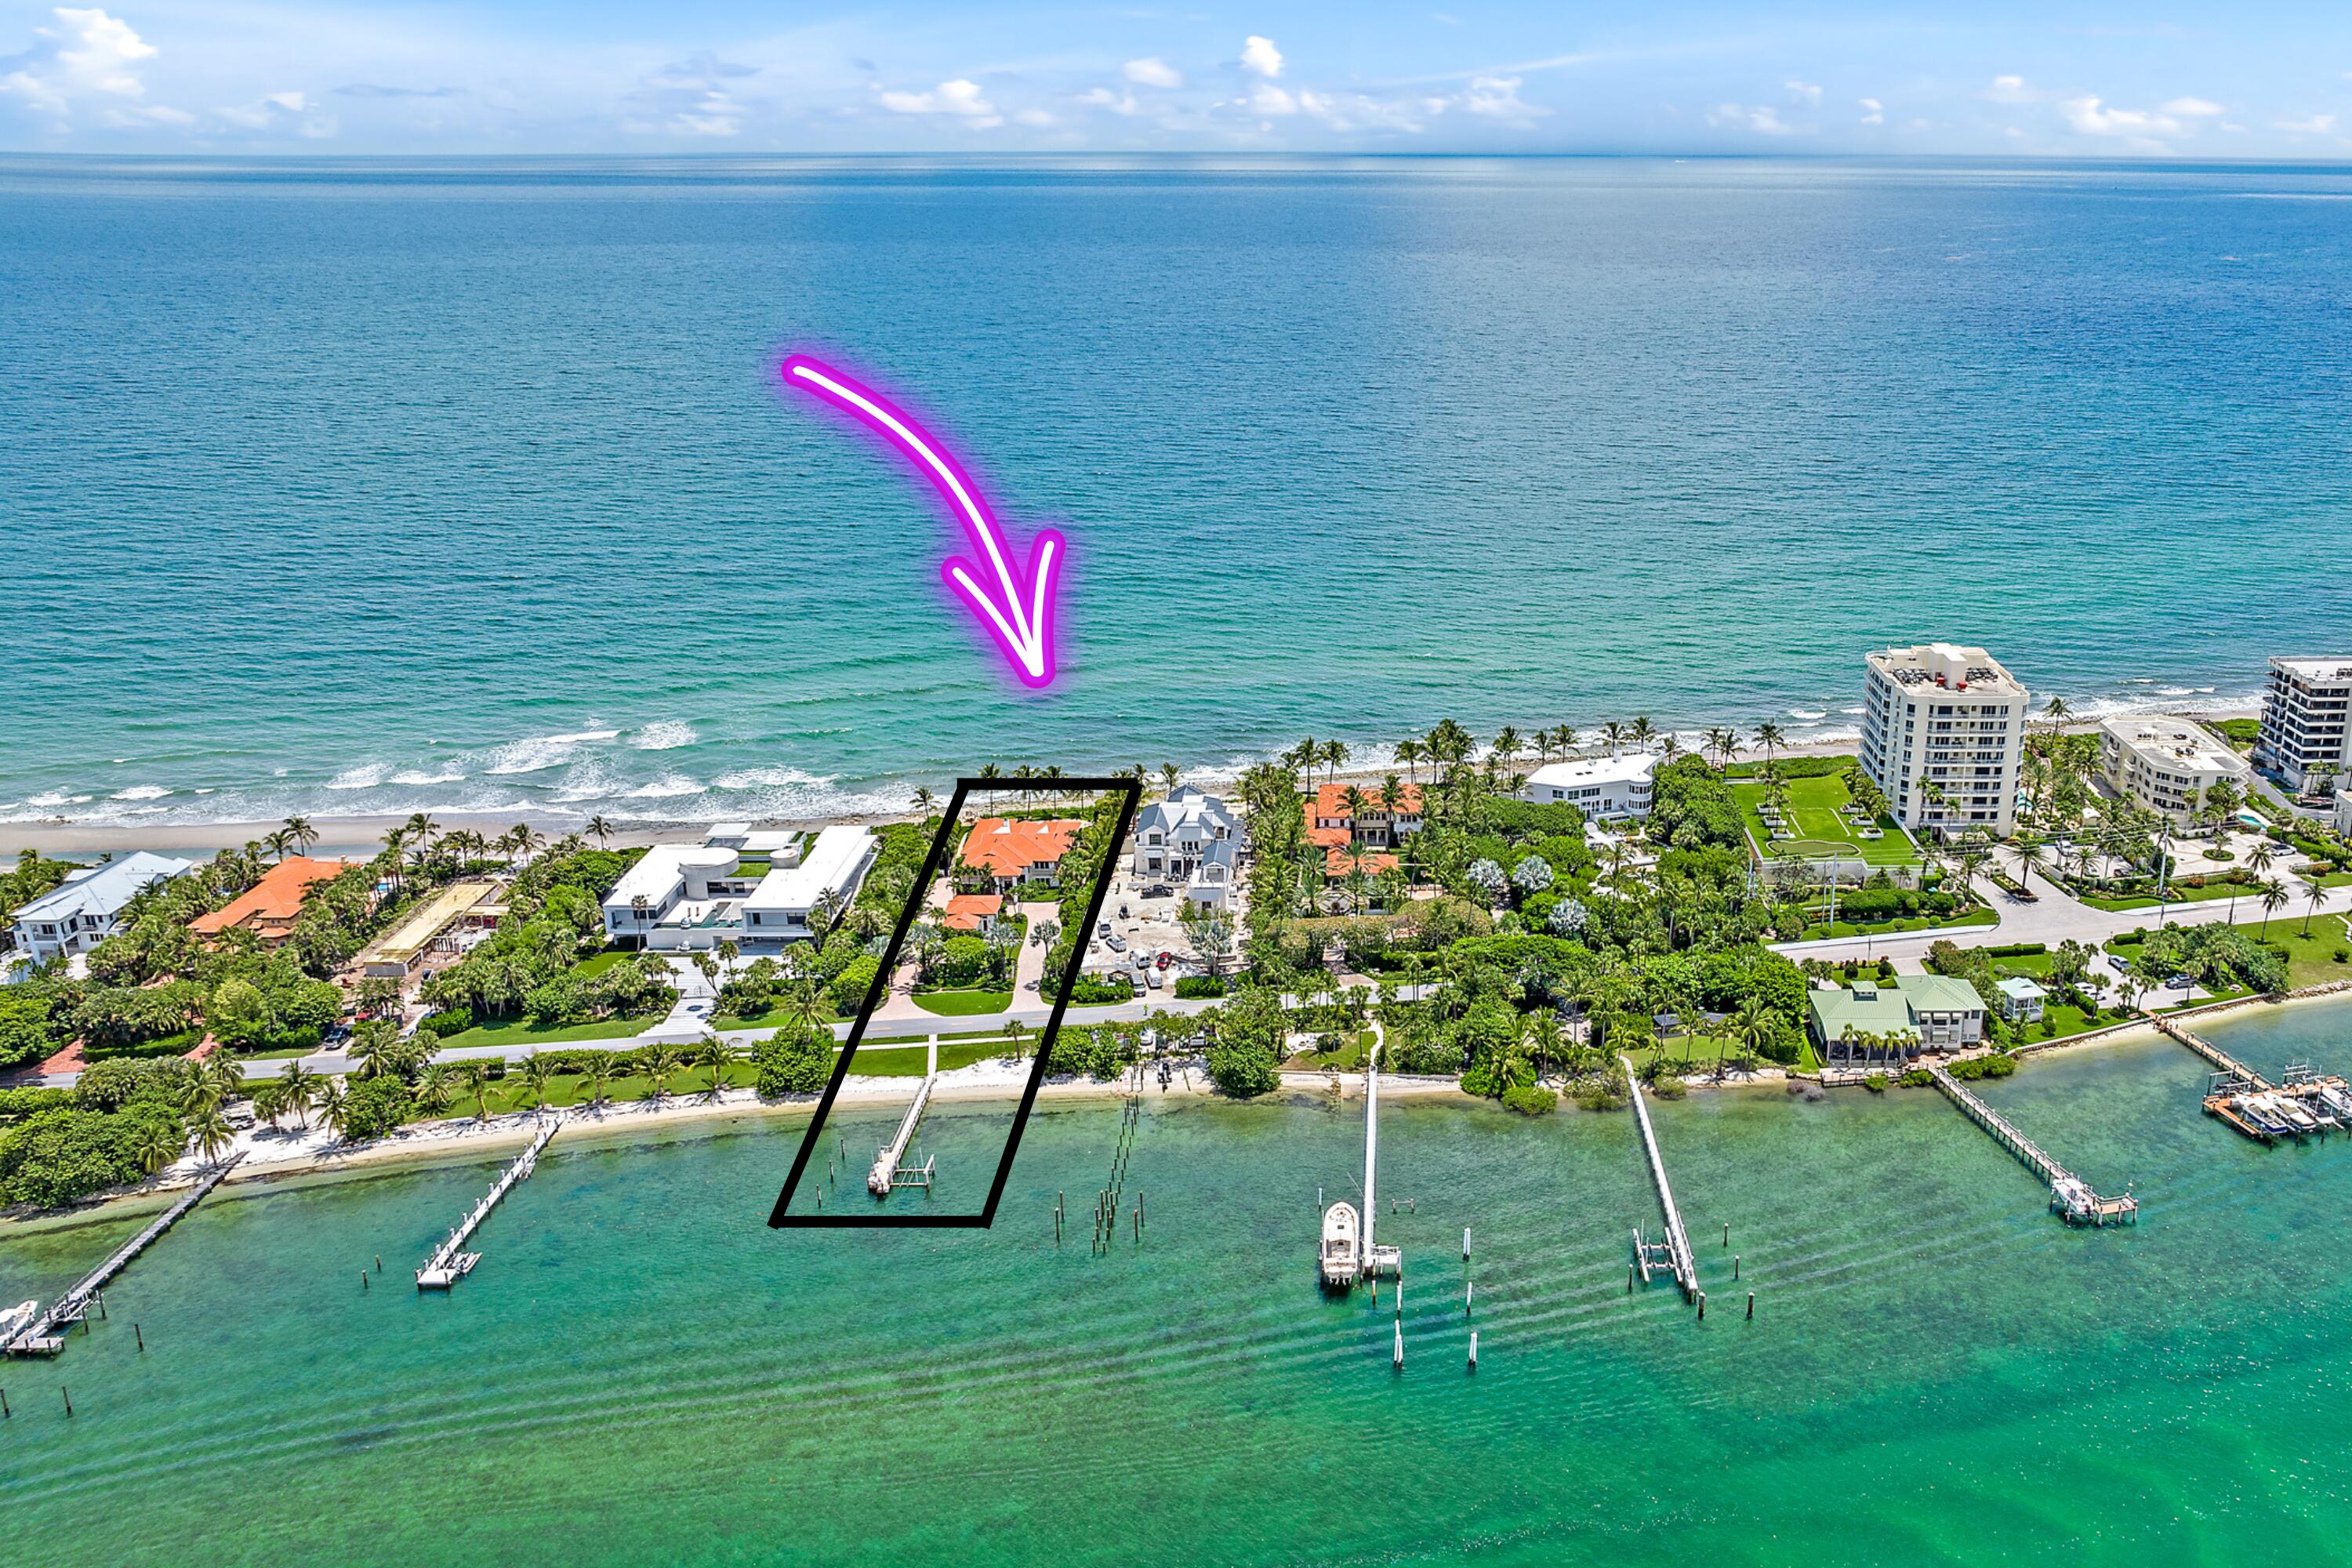 RARE and EXCEPTIONAL blend of beachfront elegance, coupled with the highly sought after Jupiter Island vibe that you've been searching for. 613 S Beach represents the best of both worlds, sitting directly on the sand on the exclusive Jupiter Island beachfront, while maintaining a casual tone with its deeded Intracoastal Waterway water frontage, boat dock, and lift. This luxurious retreat has been fully furnished and is fully equipped to make your South Florida stay effortless. Featuring an open, airy floor plan with five large bedrooms in the main home, each with a generous walk-in closet and large ensuite bathroom, plus an office or den in the main house, AND a detached large one-bedroom guest house. [click for more]